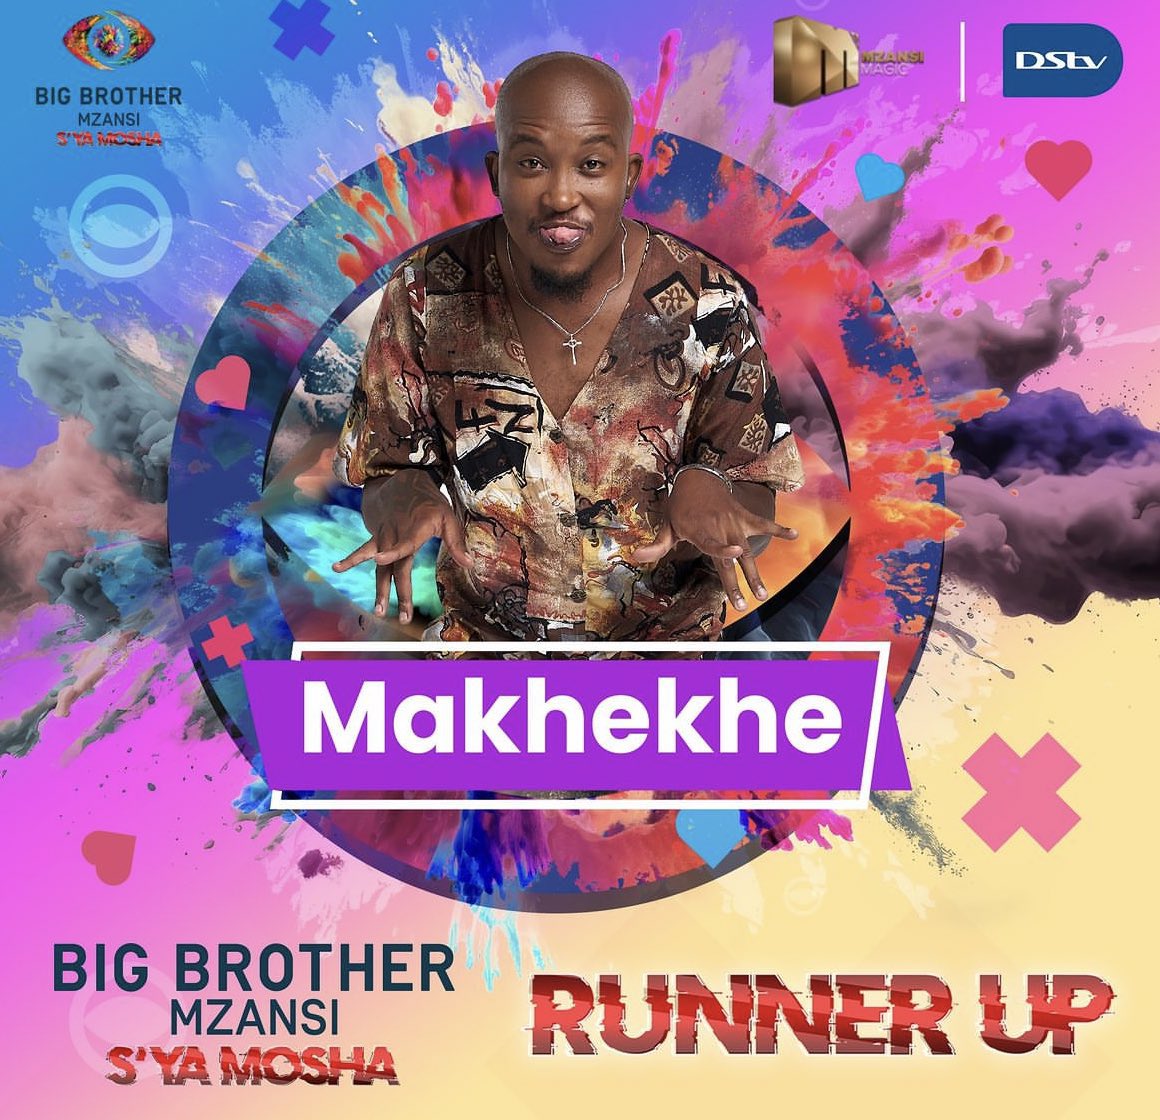 Cheers to Makhekhe for clinching the runner-up spot! His journey within the house has been truly remarkable. Cakes undoubtedly brought the most entertainment as a housemate. Wishing him all the success. #BBMzansi